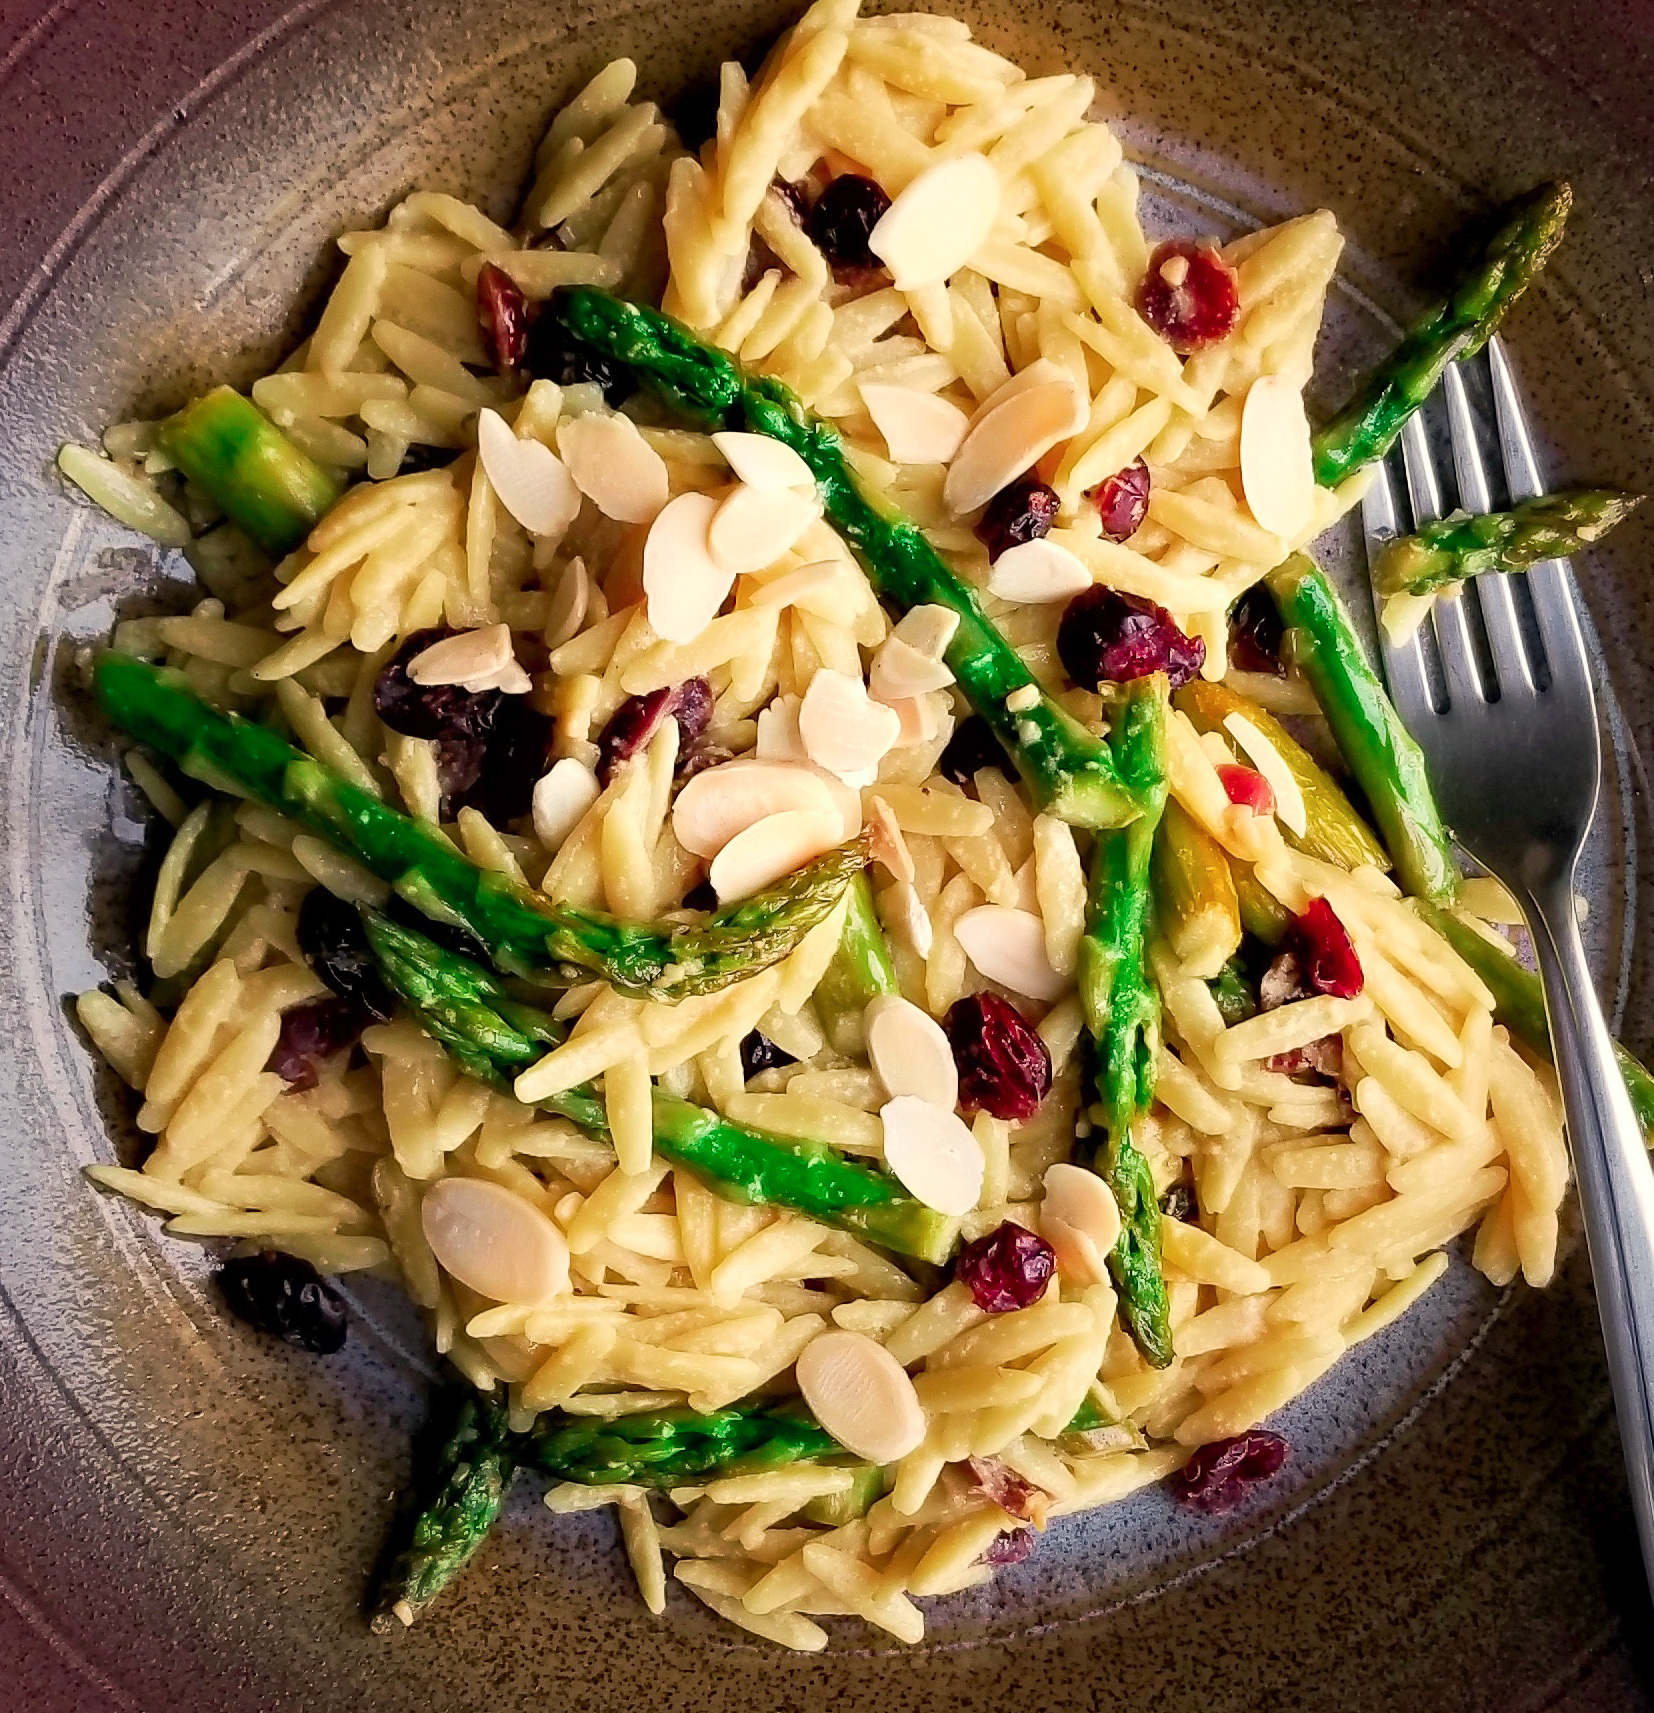 Lemon Orzo with Asparagus, Cranberries and Almonds